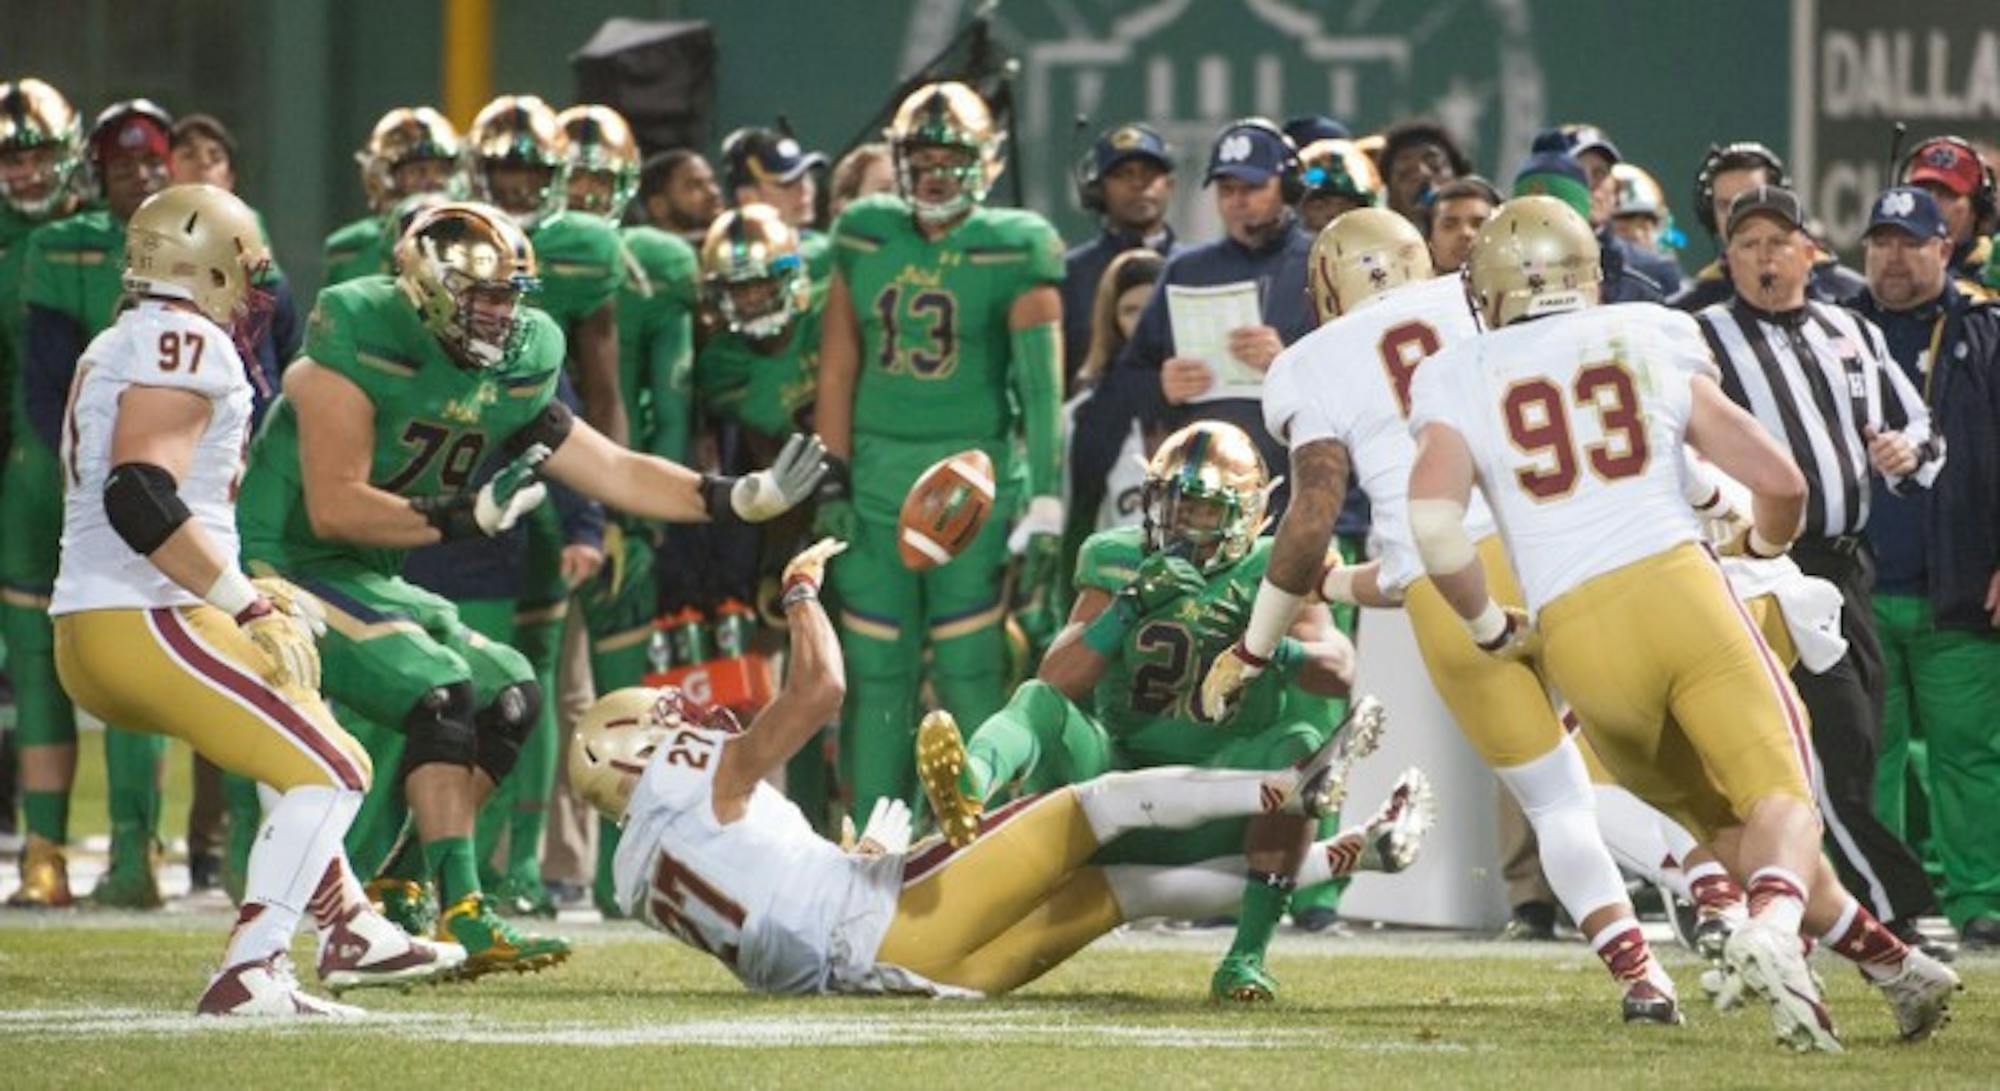 Irish senior running back C.J. Prosise, 20, loses control of the football during Notre Dame’s 19-16 win over Boston College on Saturday at Fenway Park in Boston. The Eagles  recovered the fumble, one of Notre Dame’s five turnovers in the game. Prosise left the game in the second quarter due to a high ankle sprain after running for 54 yards on nine carries.